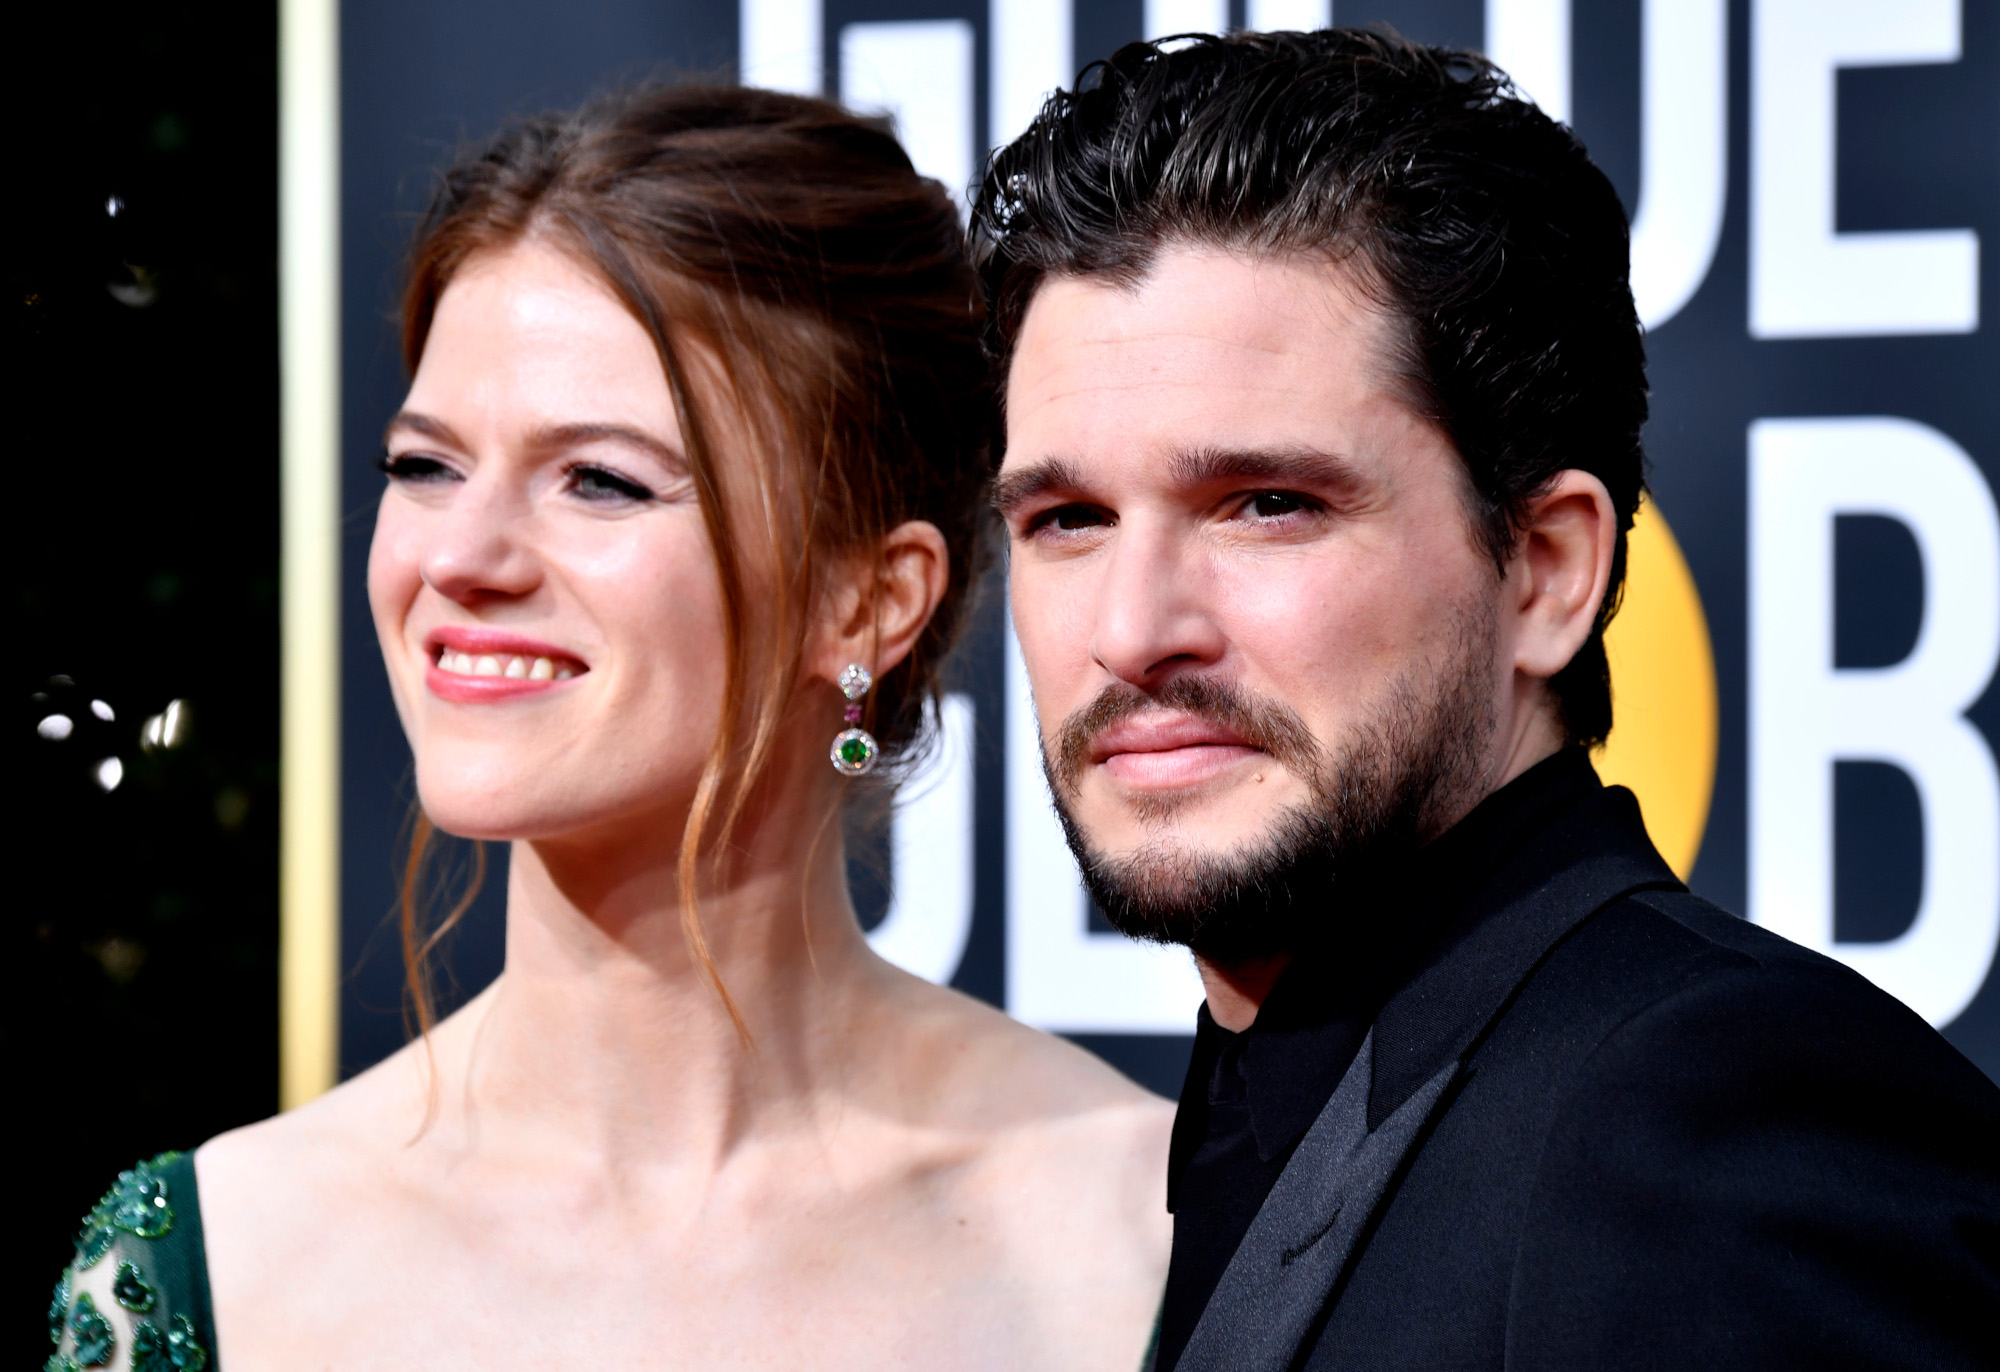 Game of Thrones stars Rose Leslie and Kit Harington. She's on the left with her hair up and a green dress on. He's wearing a suit and standing next to her